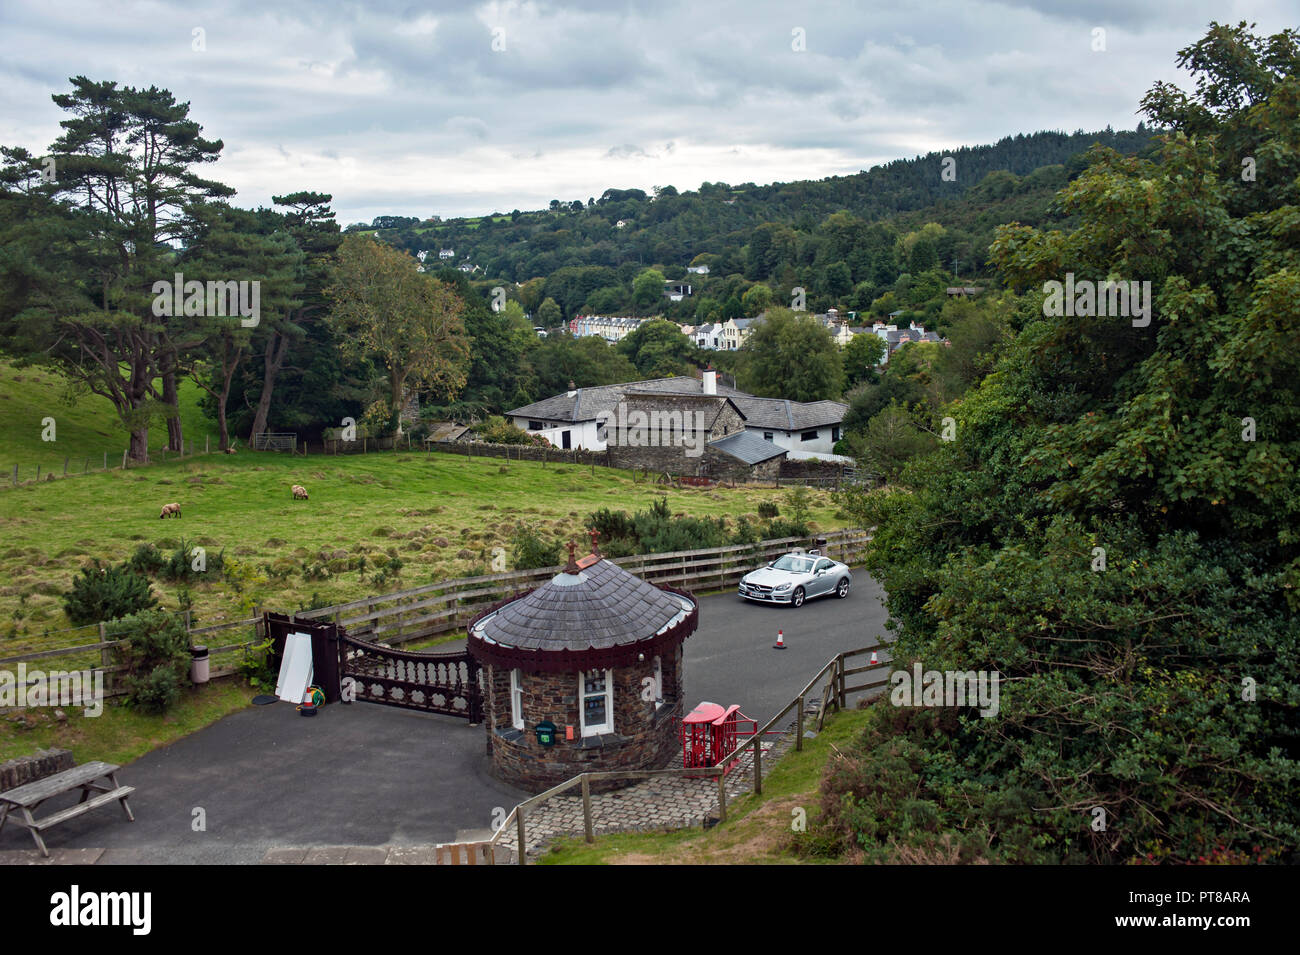 Entrance hut, The Laxey Wheel, Laxey, Isle of Man with Laxey village in background. Stock Photo